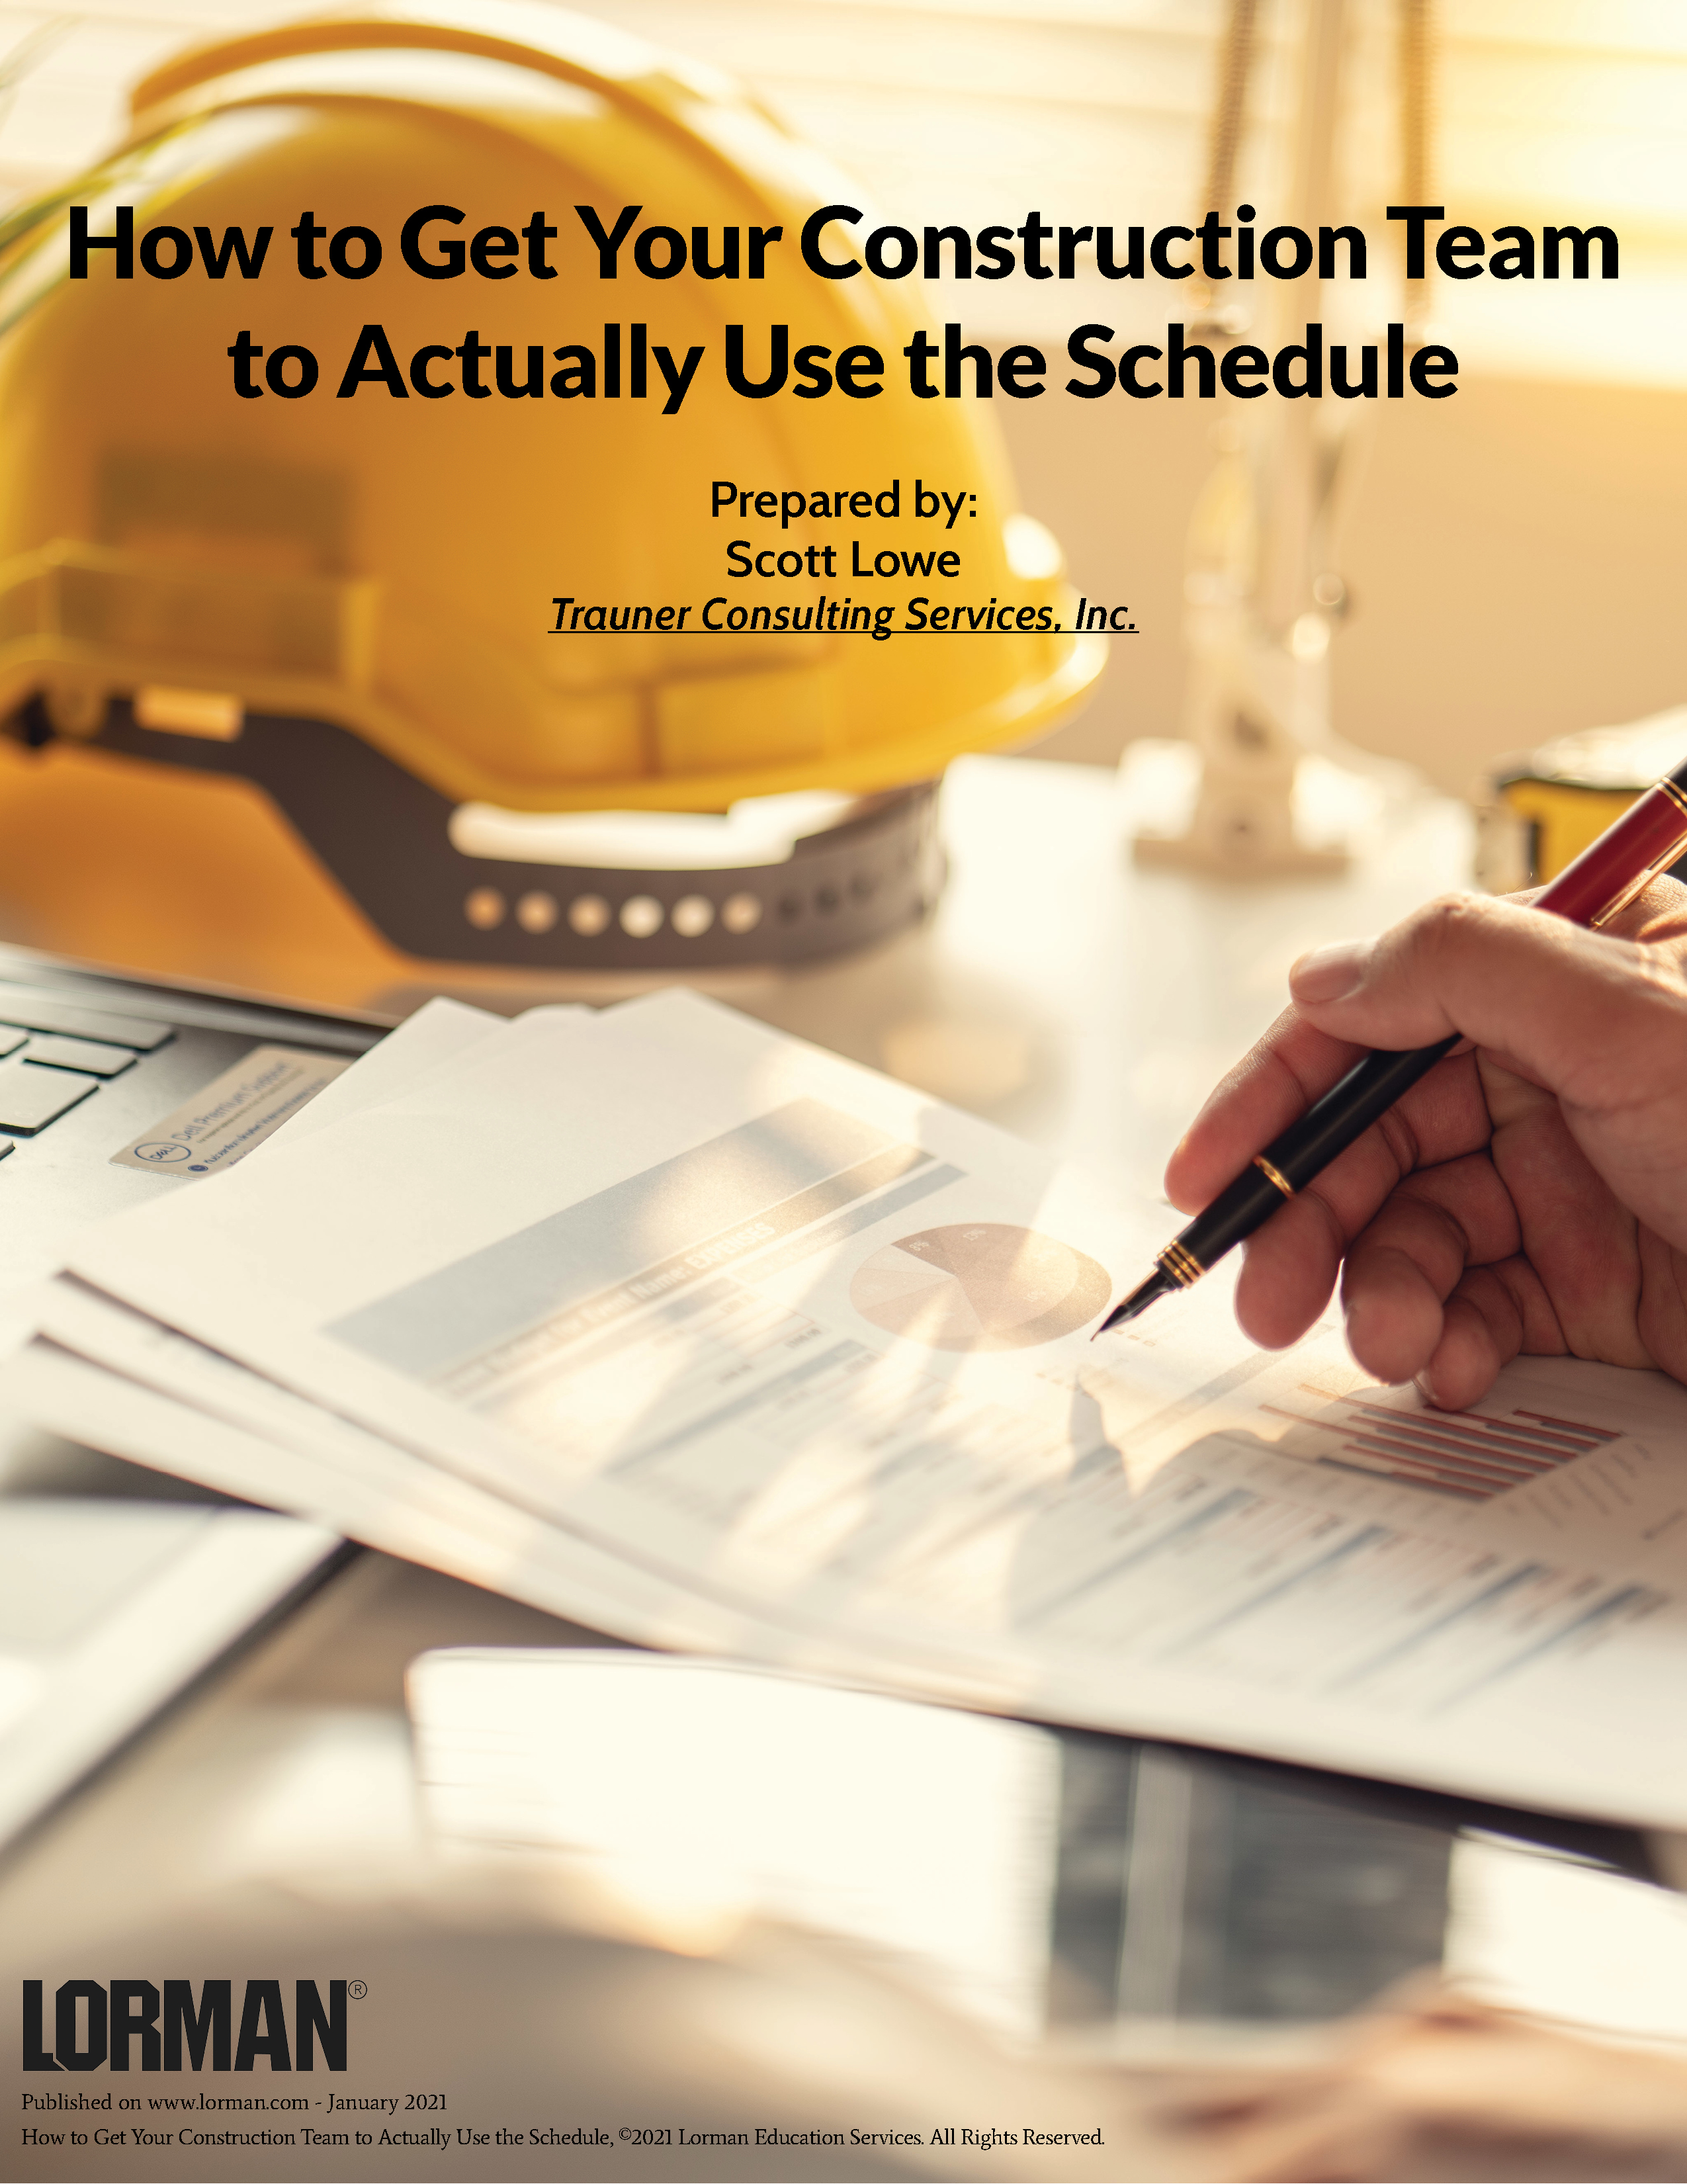 How to Get Your Construction Team to Actually Use the Schedule